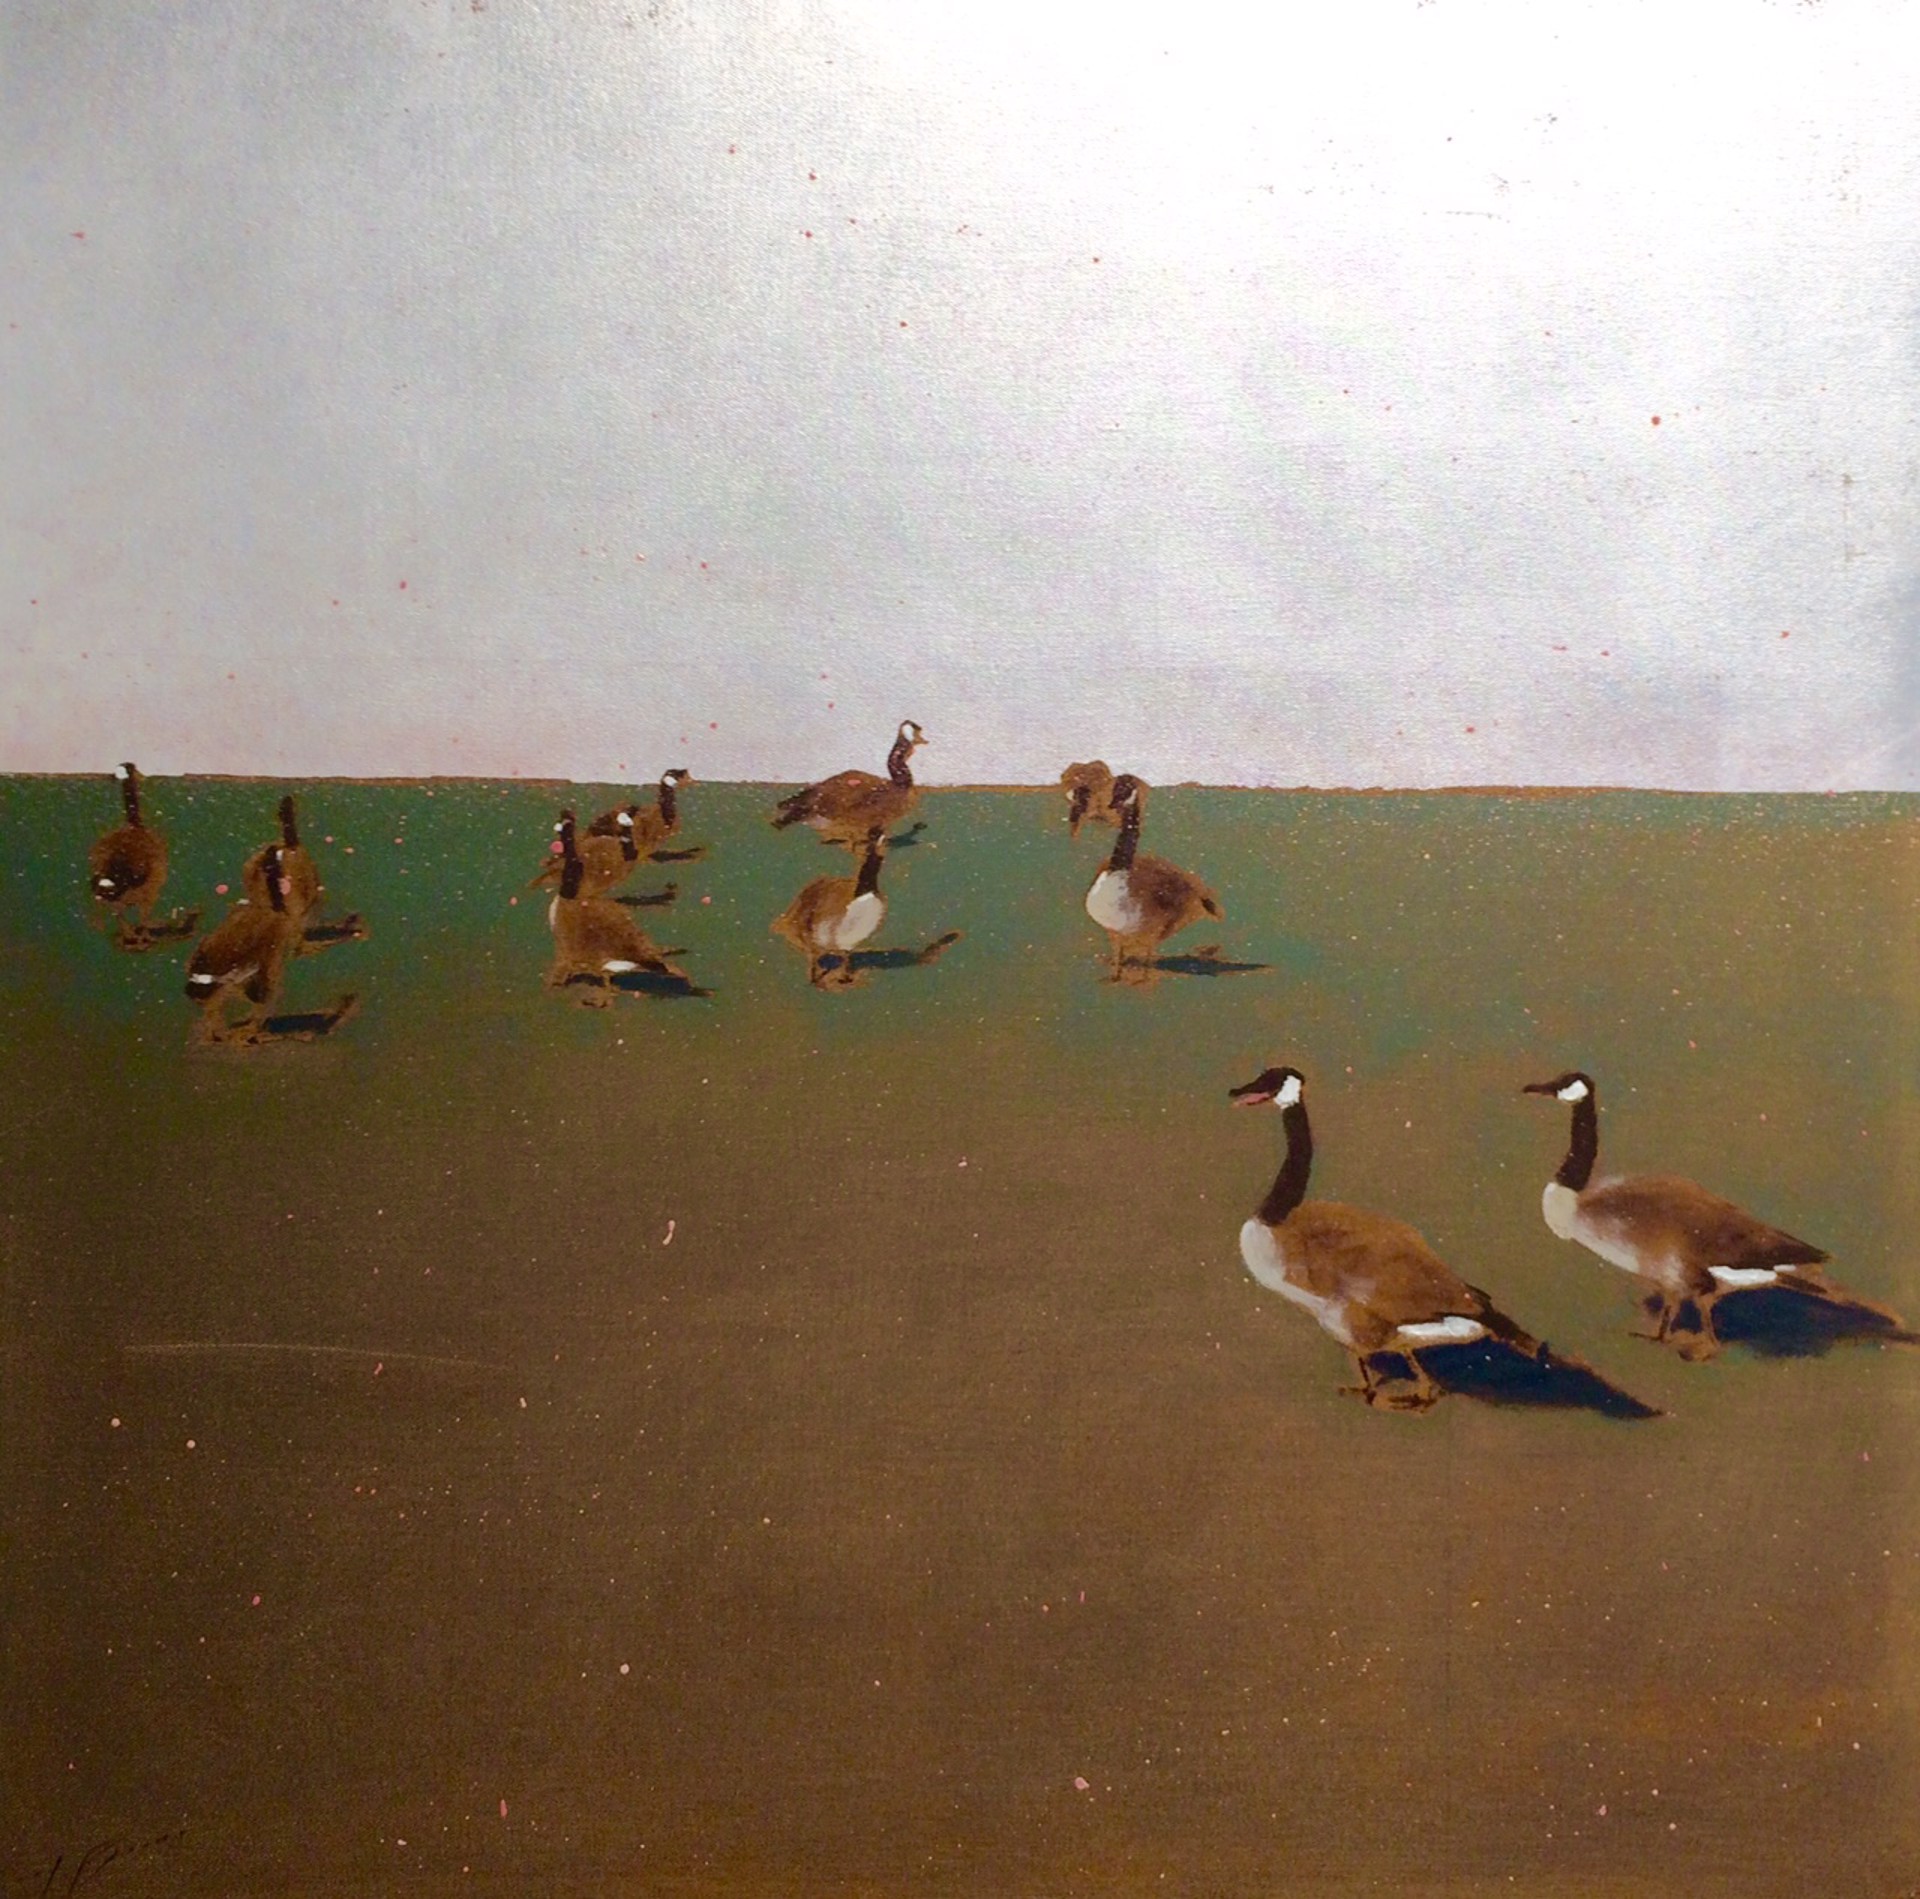 Geese on Grass by Josh Brown